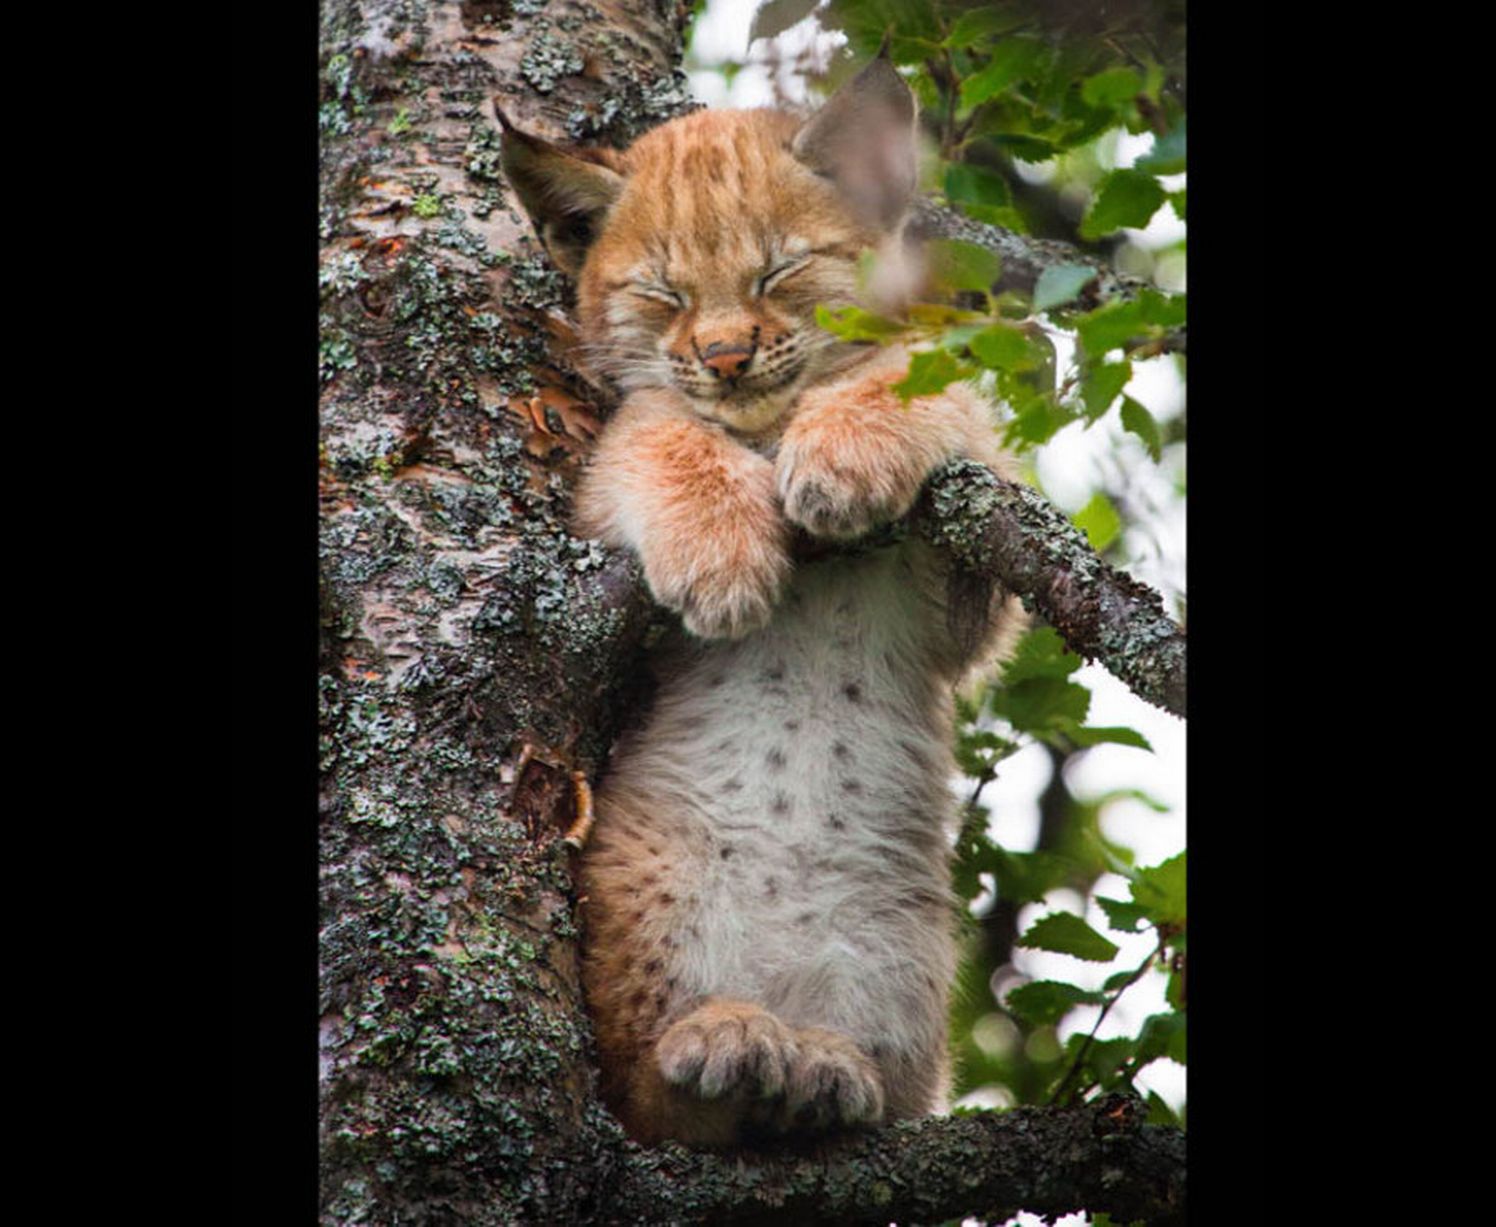 Lynx kitten, how do you fall asleep in a tree like this?